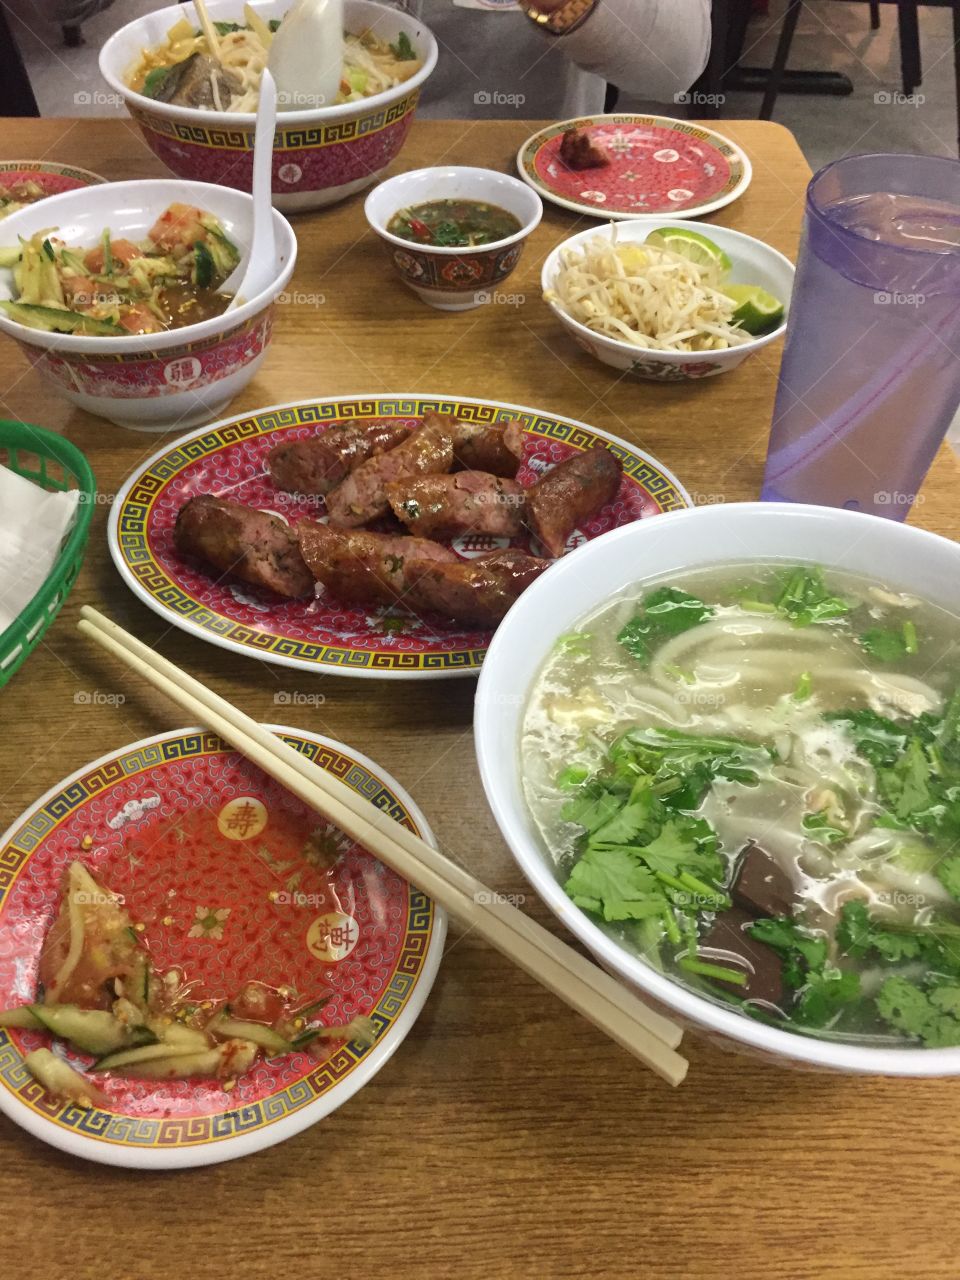 Lao Food in Milwaukee 
Kao piek sen (lao chicken fresh noodle soup kinda like chicken and dumplings)
Thum muk thang (spicy cucumber salad)
Stickey rice
Lao BBQ sausages 